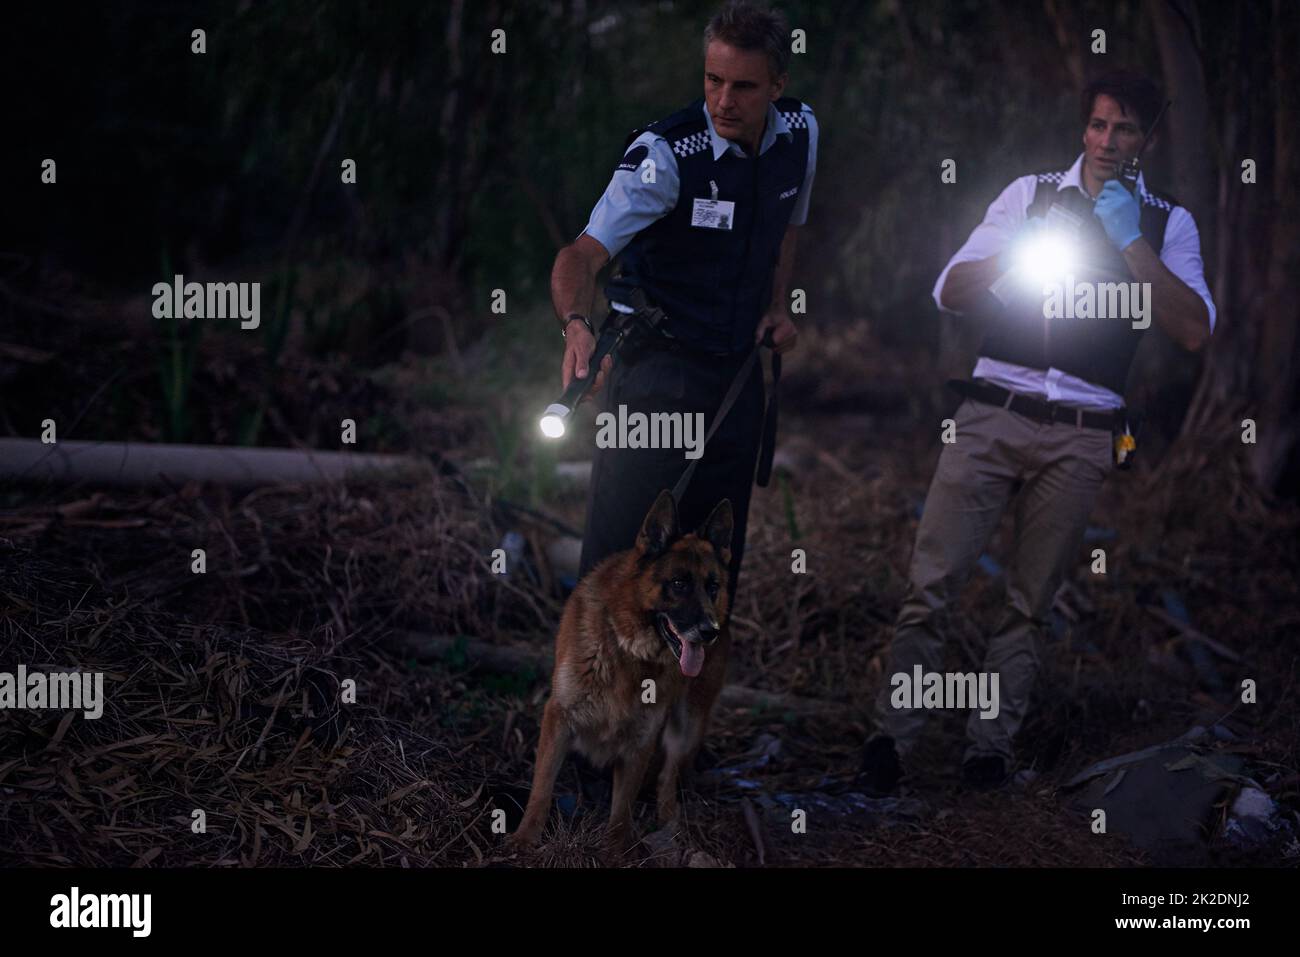 Theyll get their man. Shot of two policemen and their canine tracking a suspect through the brush at night. Stock Photo